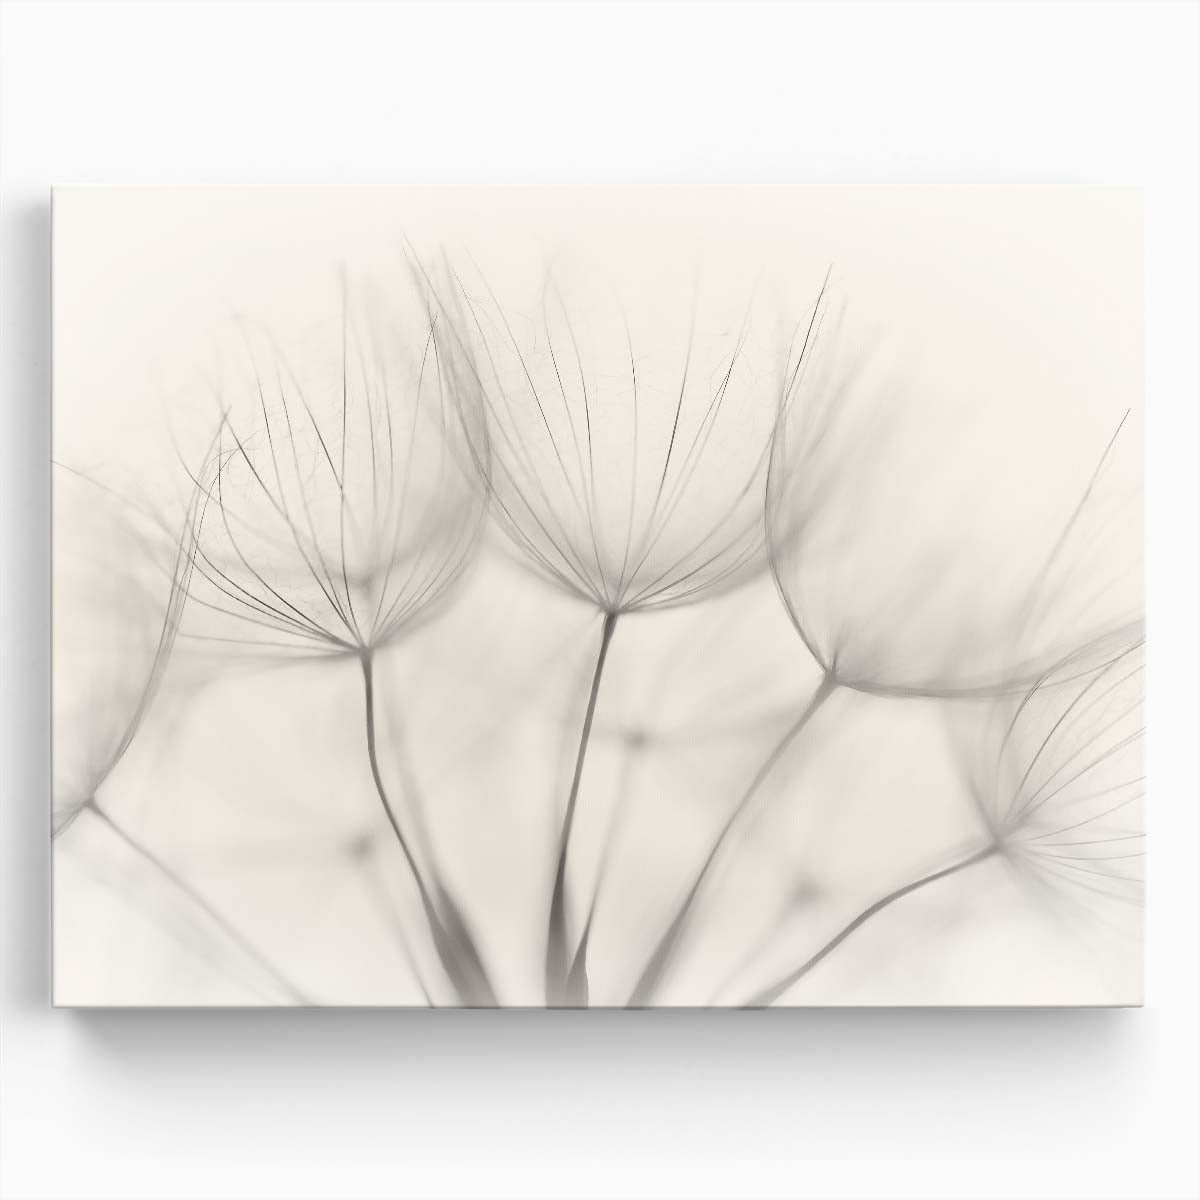 Delicate White Dandelion Macro Photography Wall Art Wall Art by Luxuriance Designs. Made in USA.